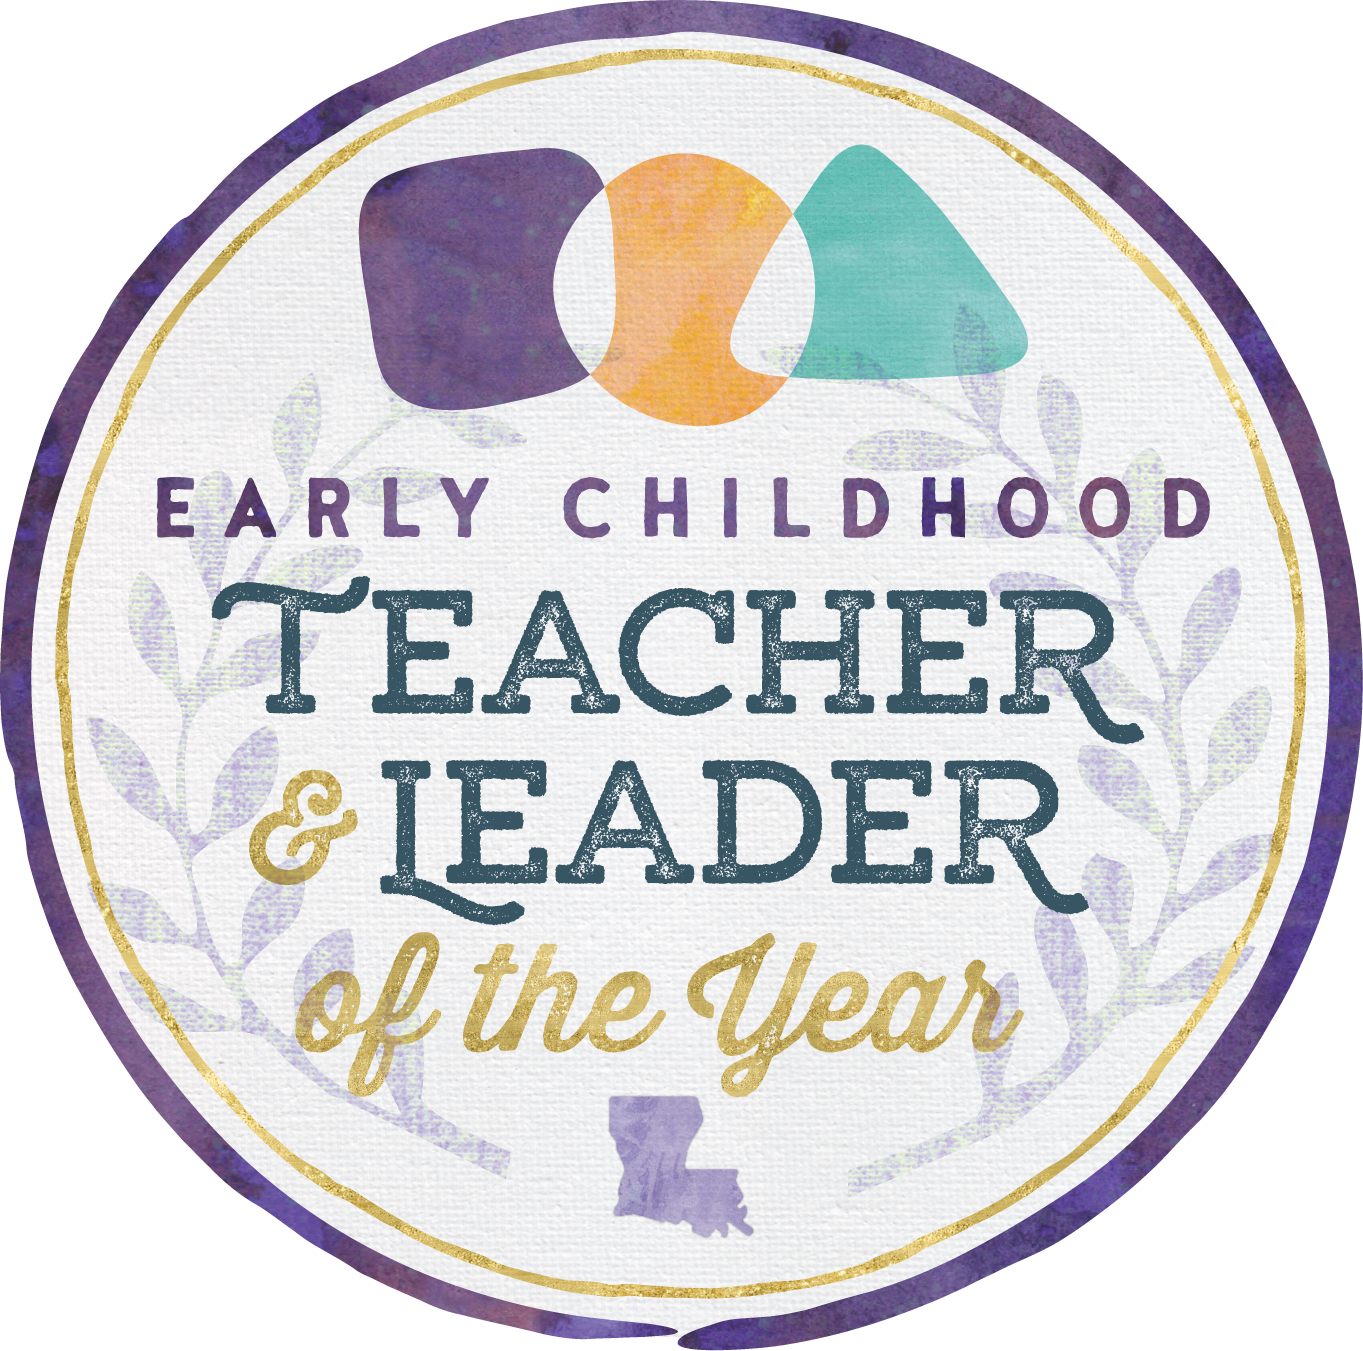 Early Childhood Teacher and Leader of the Year